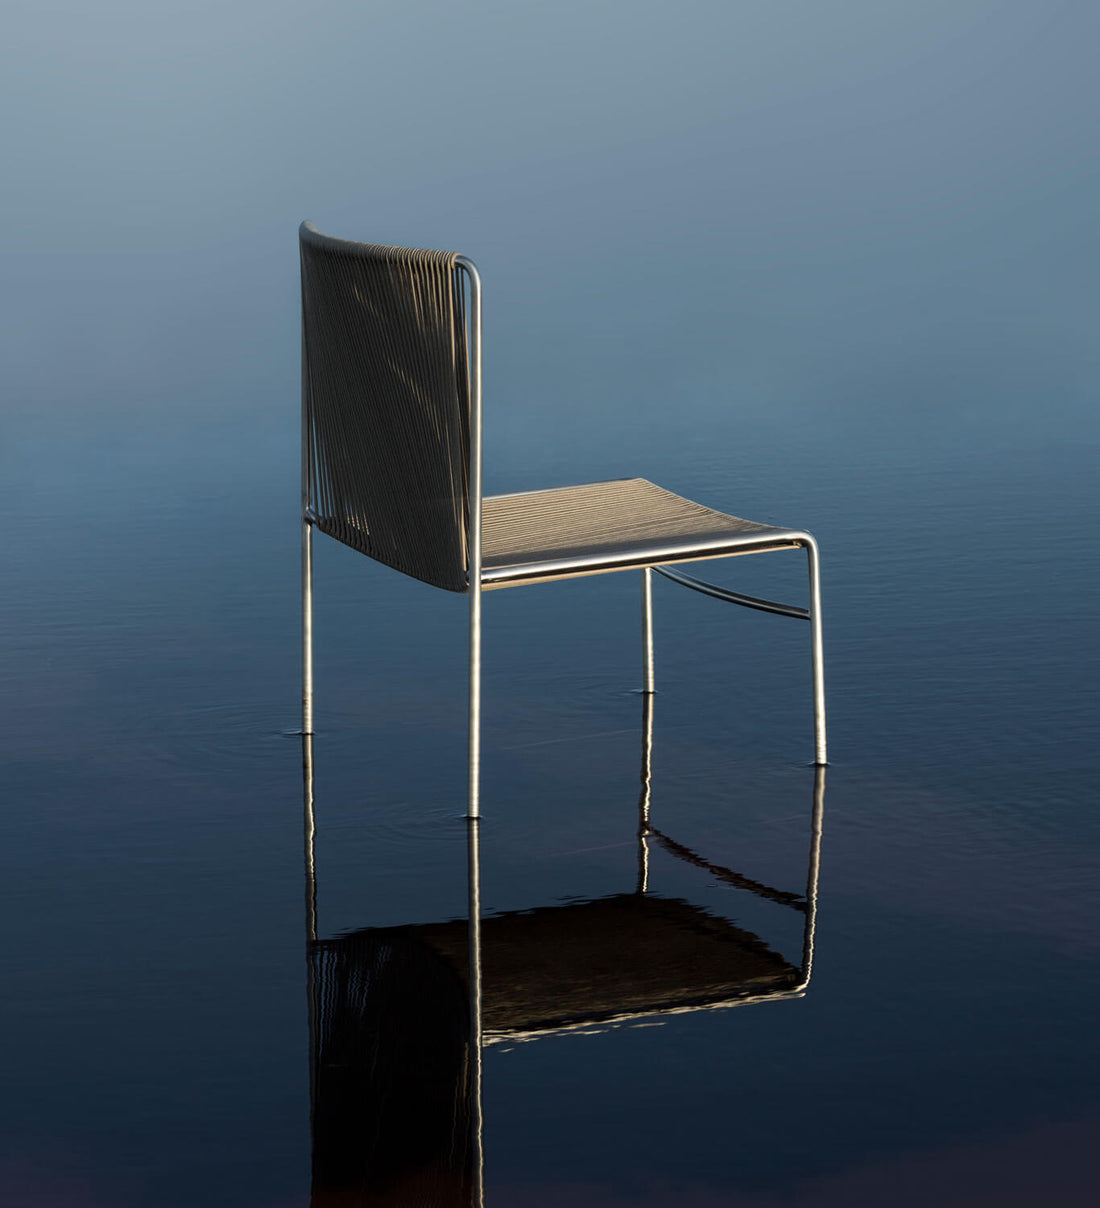 Bebó Objects Lyre chair